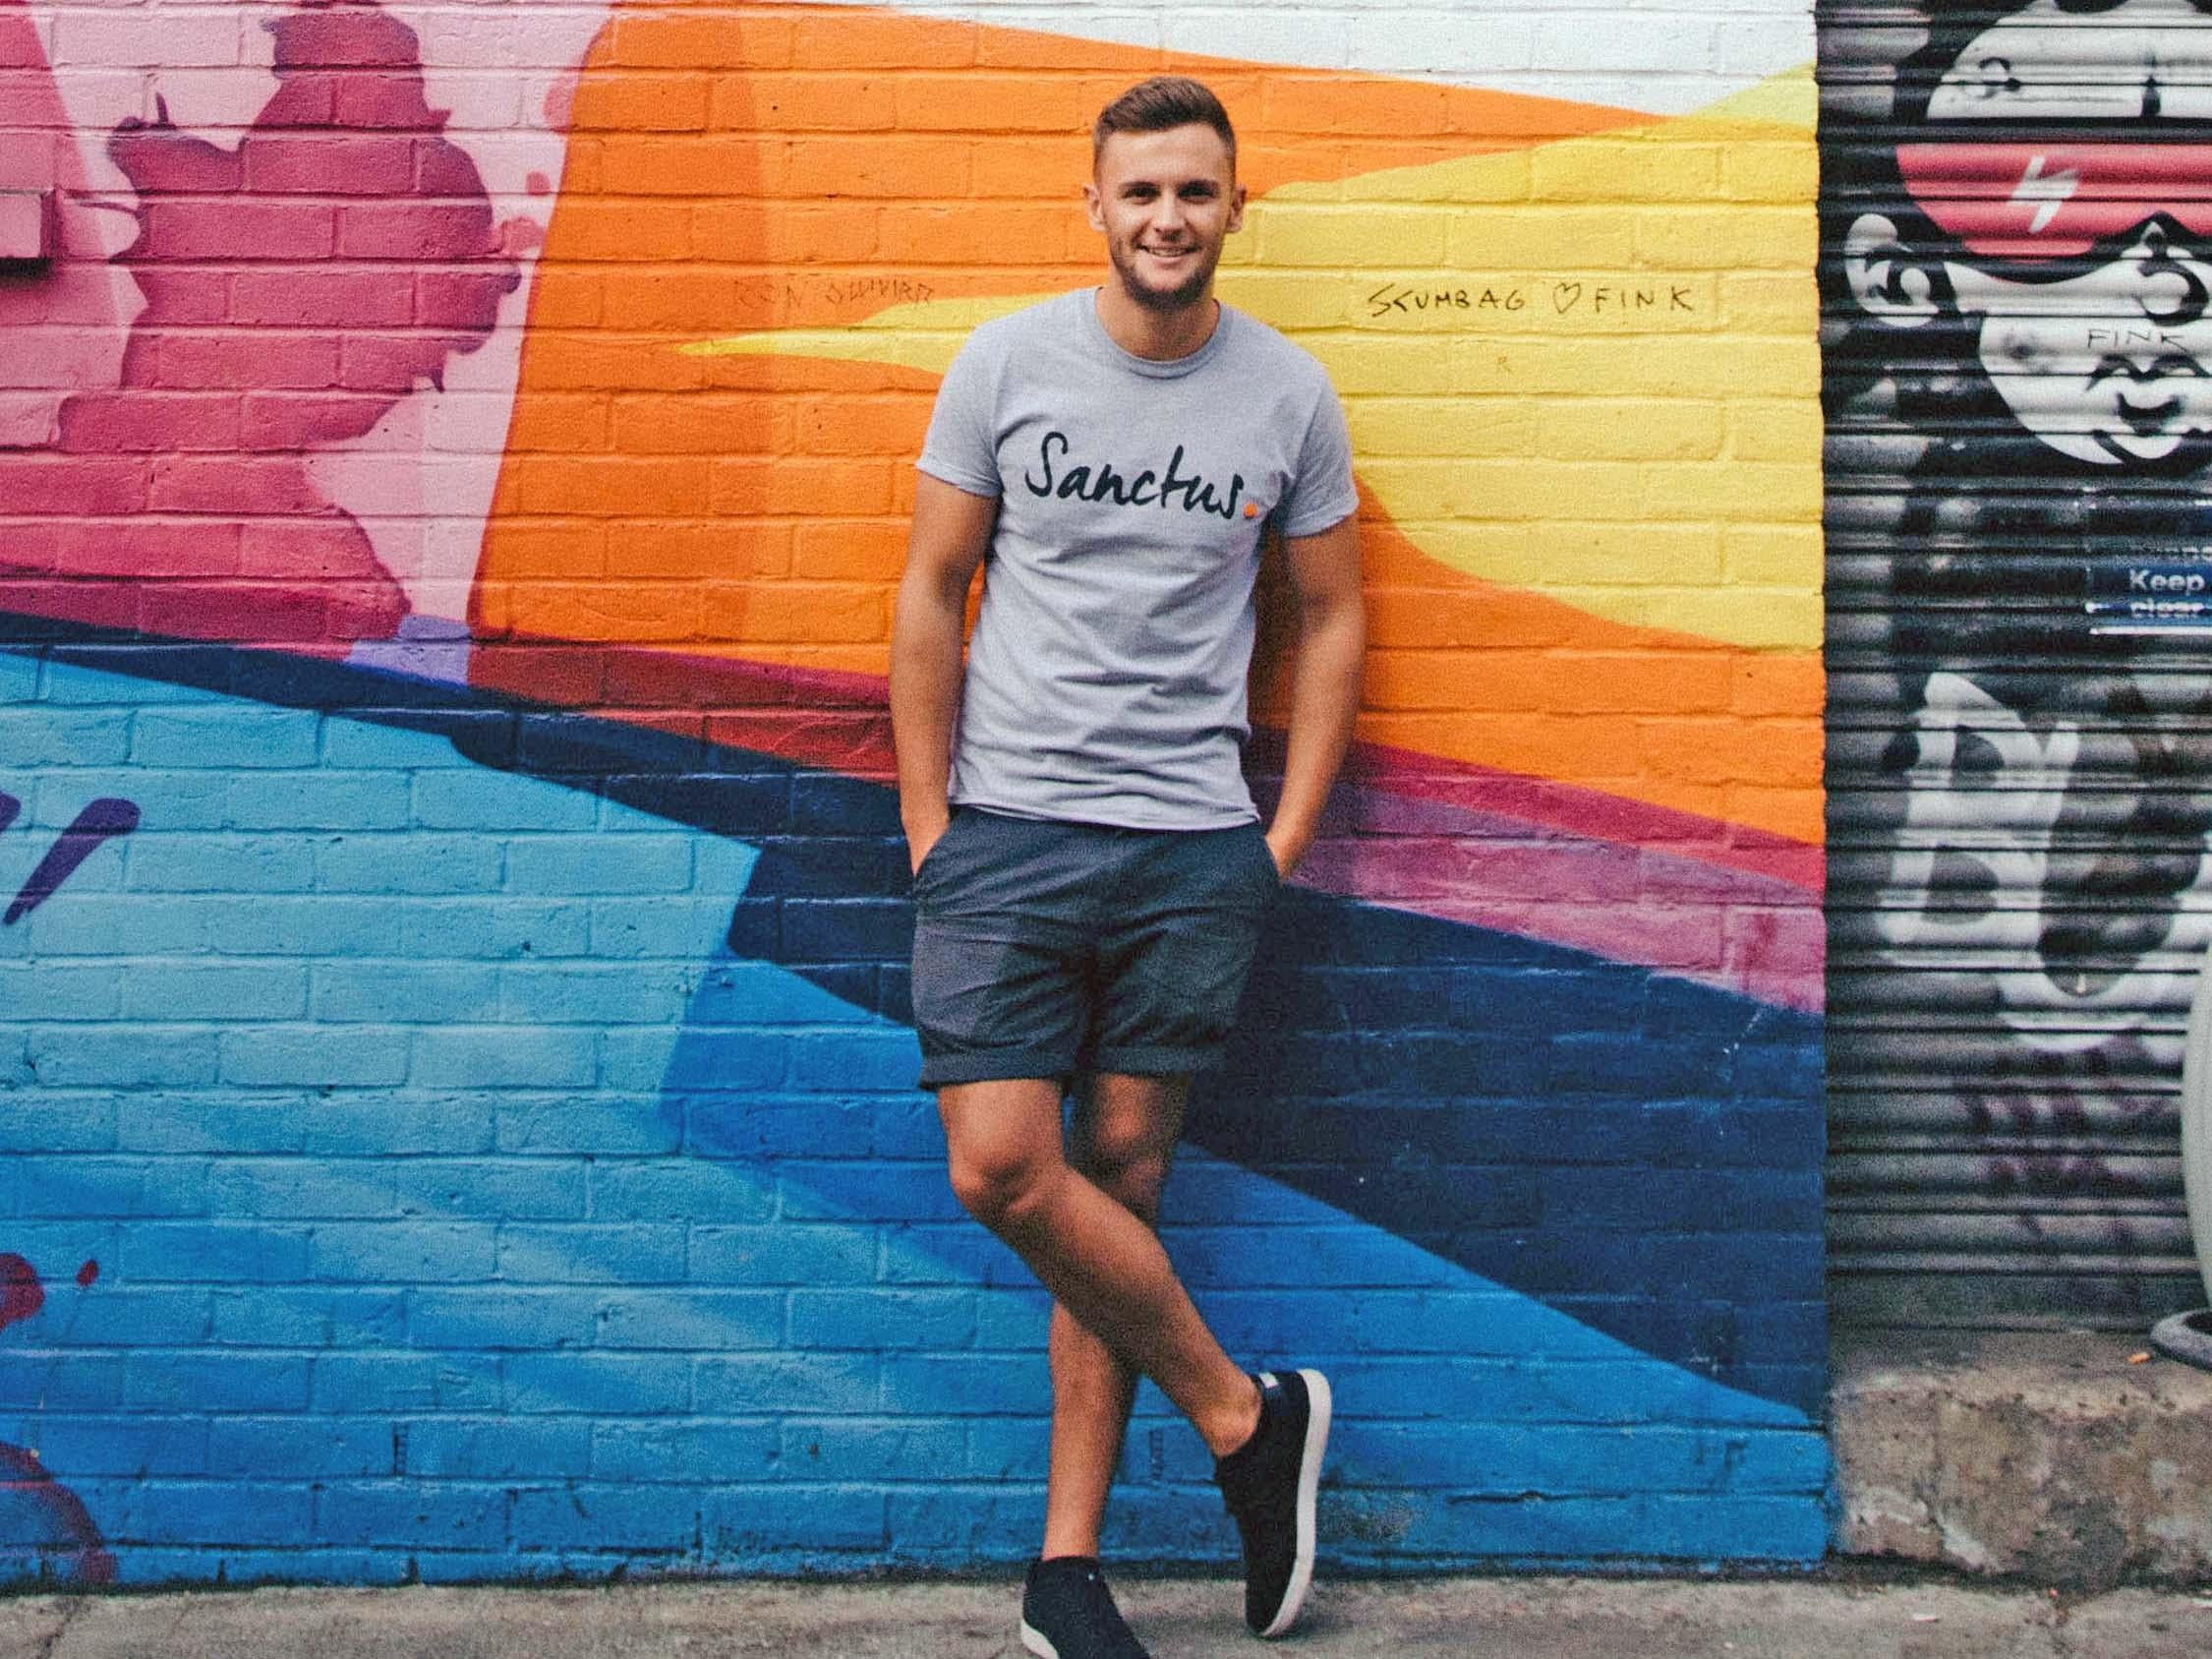 James Routledge started MatchChat, a social networking site for sports fans, with three friends when he was just 20 and still at Sheffield University